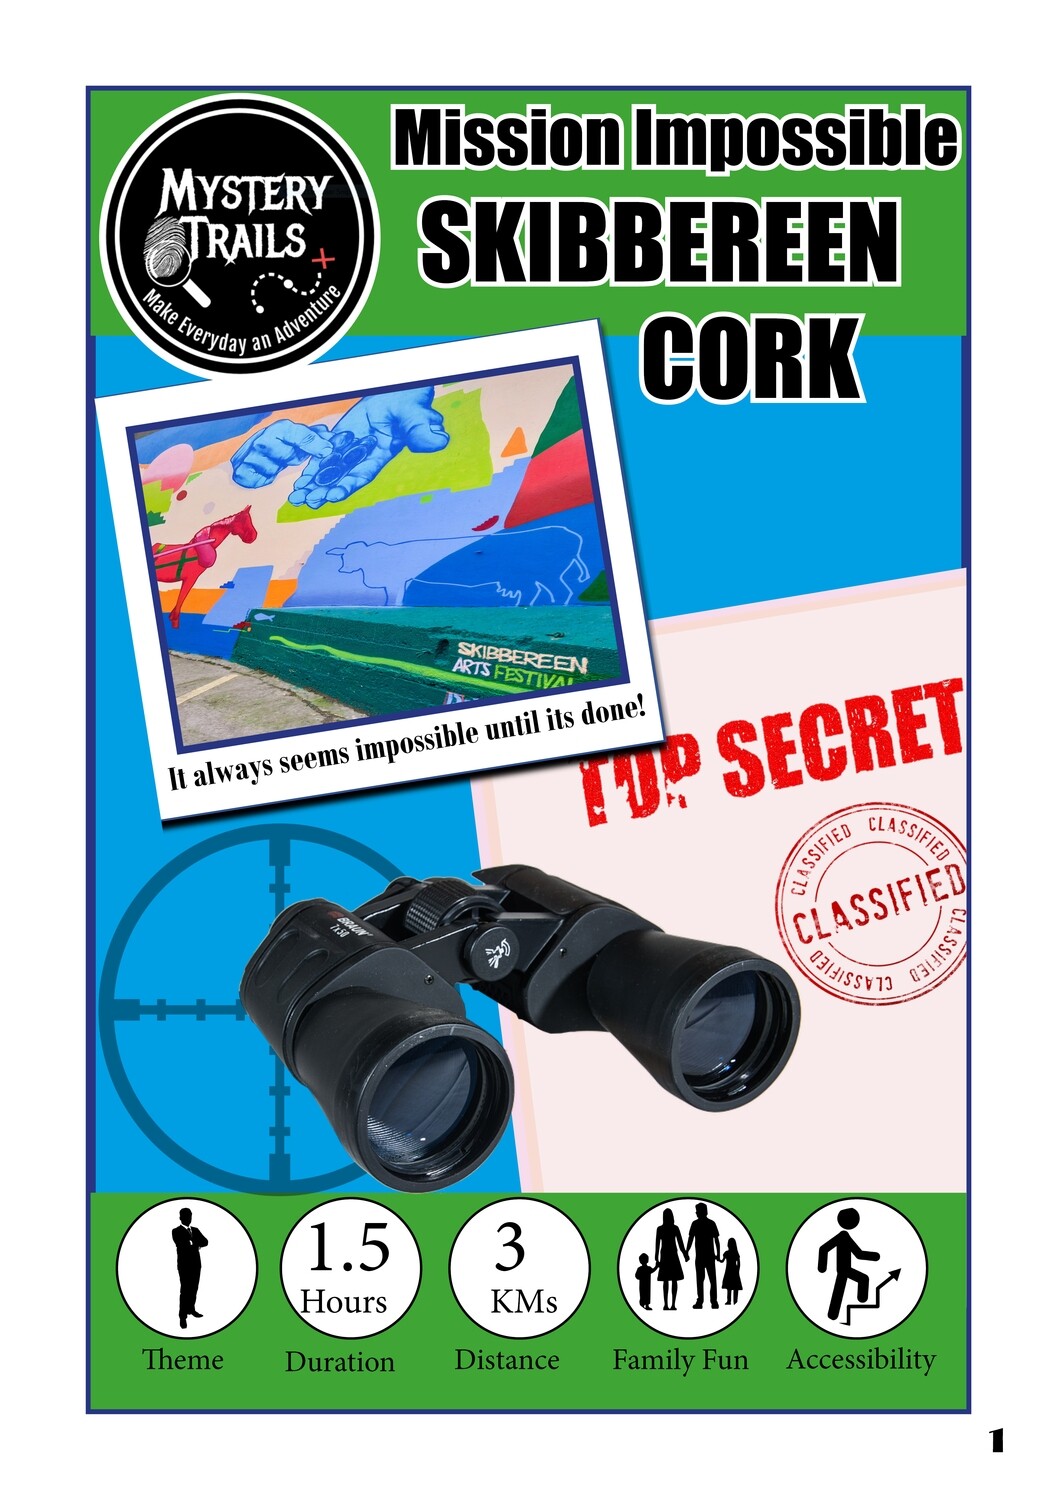 Skibbereen- Mission Impossible - County Cork